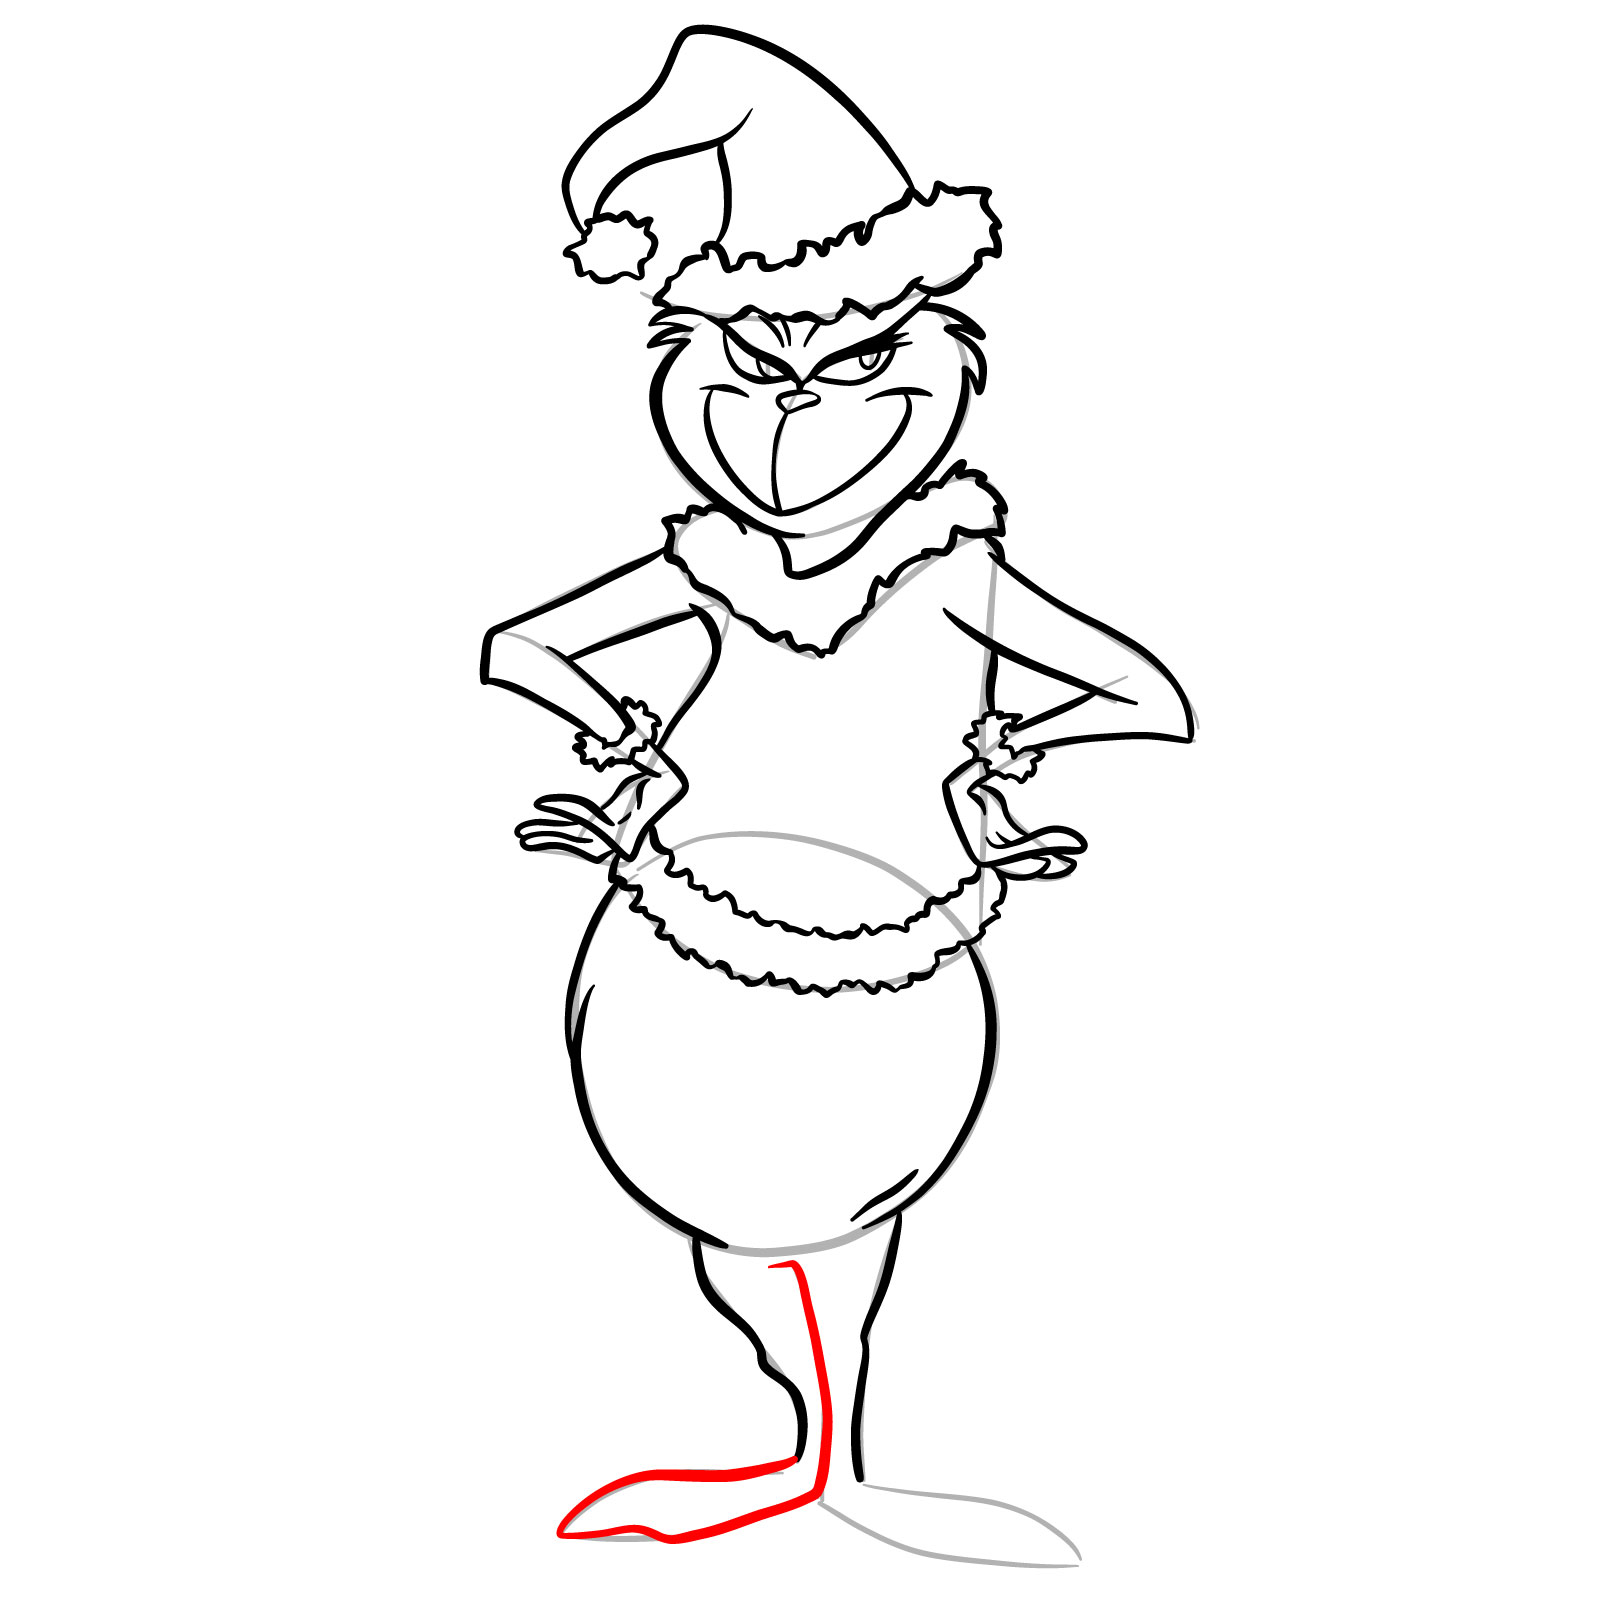 How to draw The Grinch in a Christmas costume - step 25